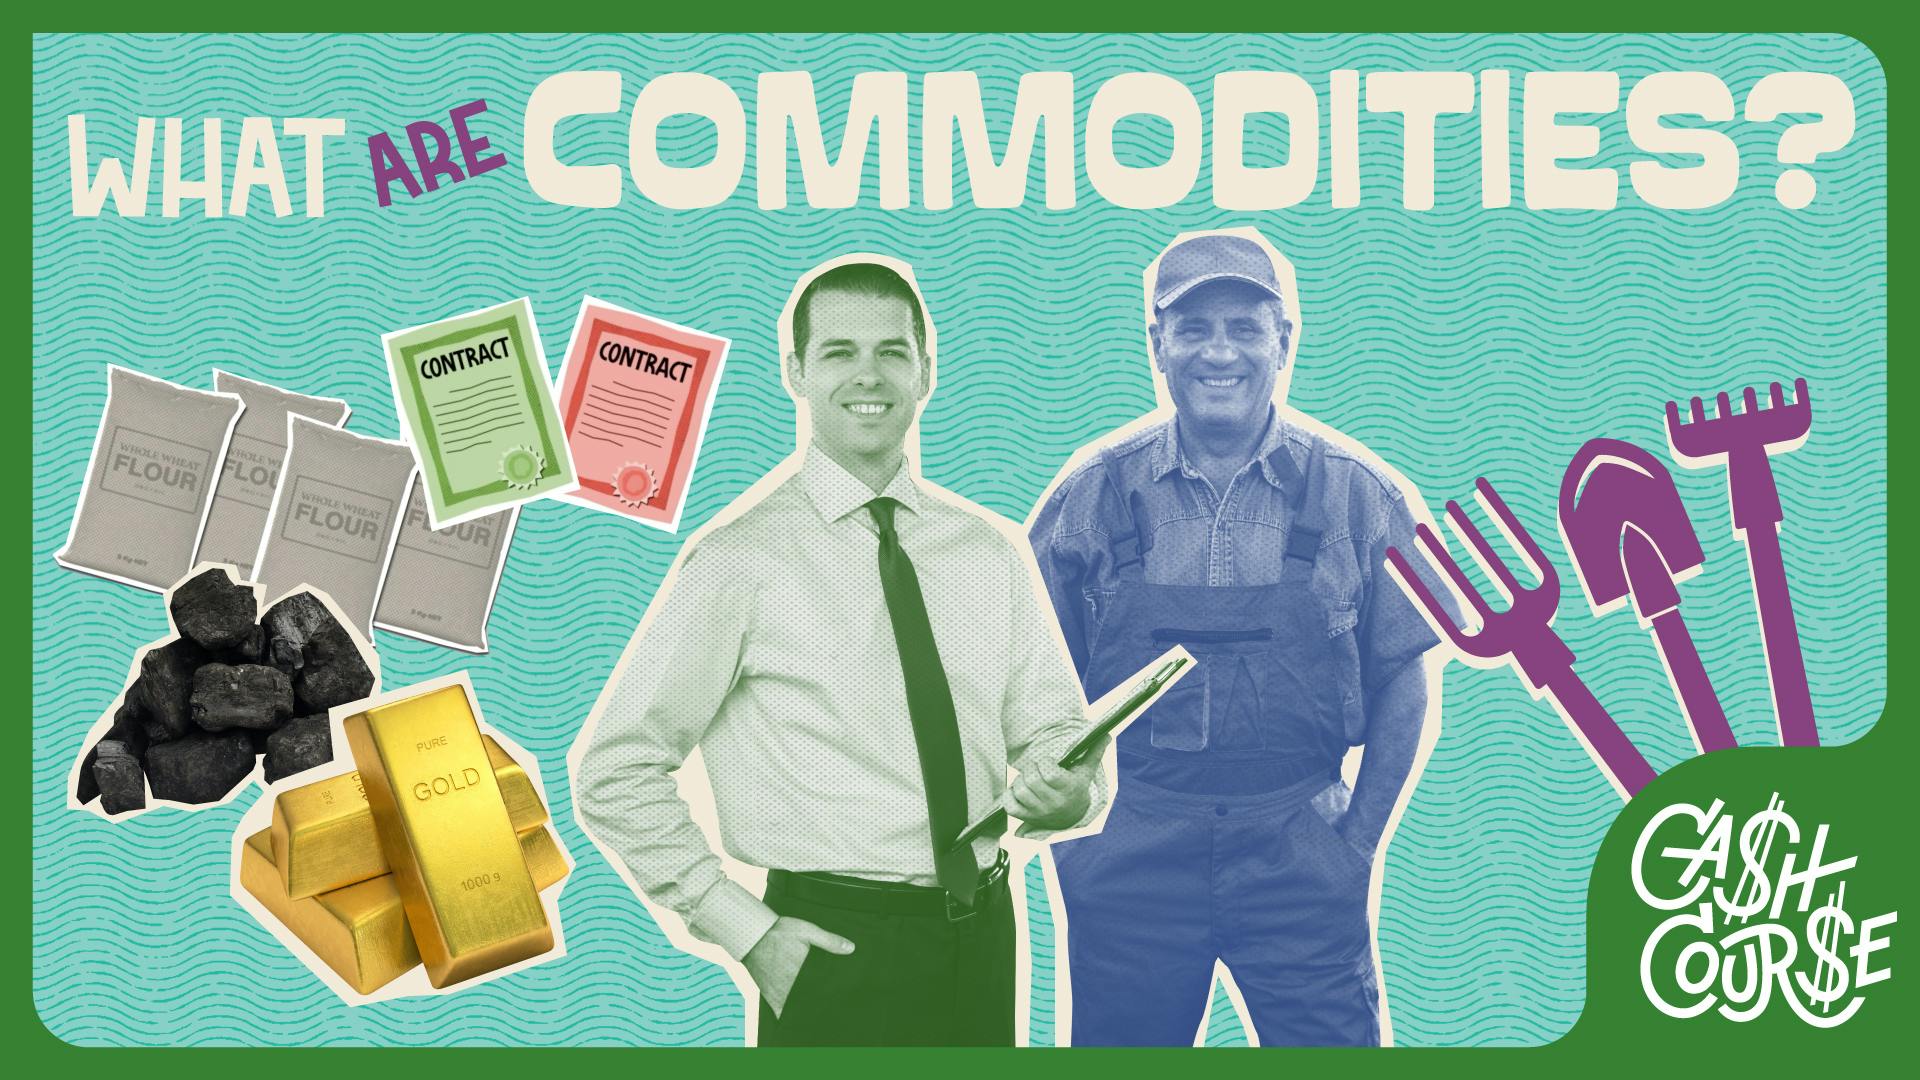 What Are Commodities?